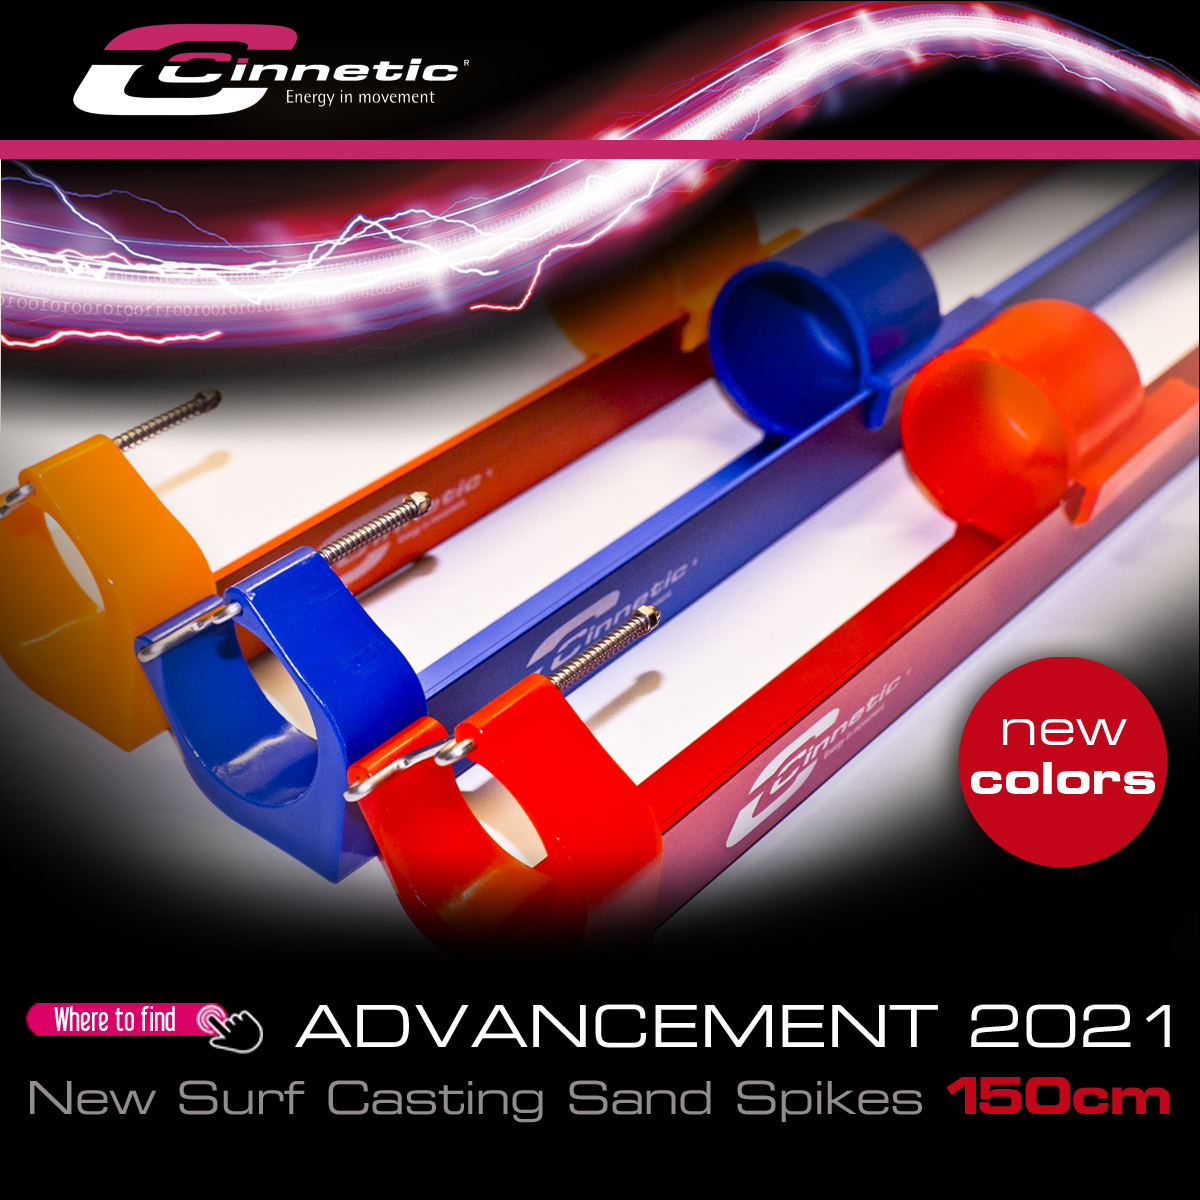 Cinnetic Newsletter - News Preview 2021: SURF CASTING SAND SPIKE